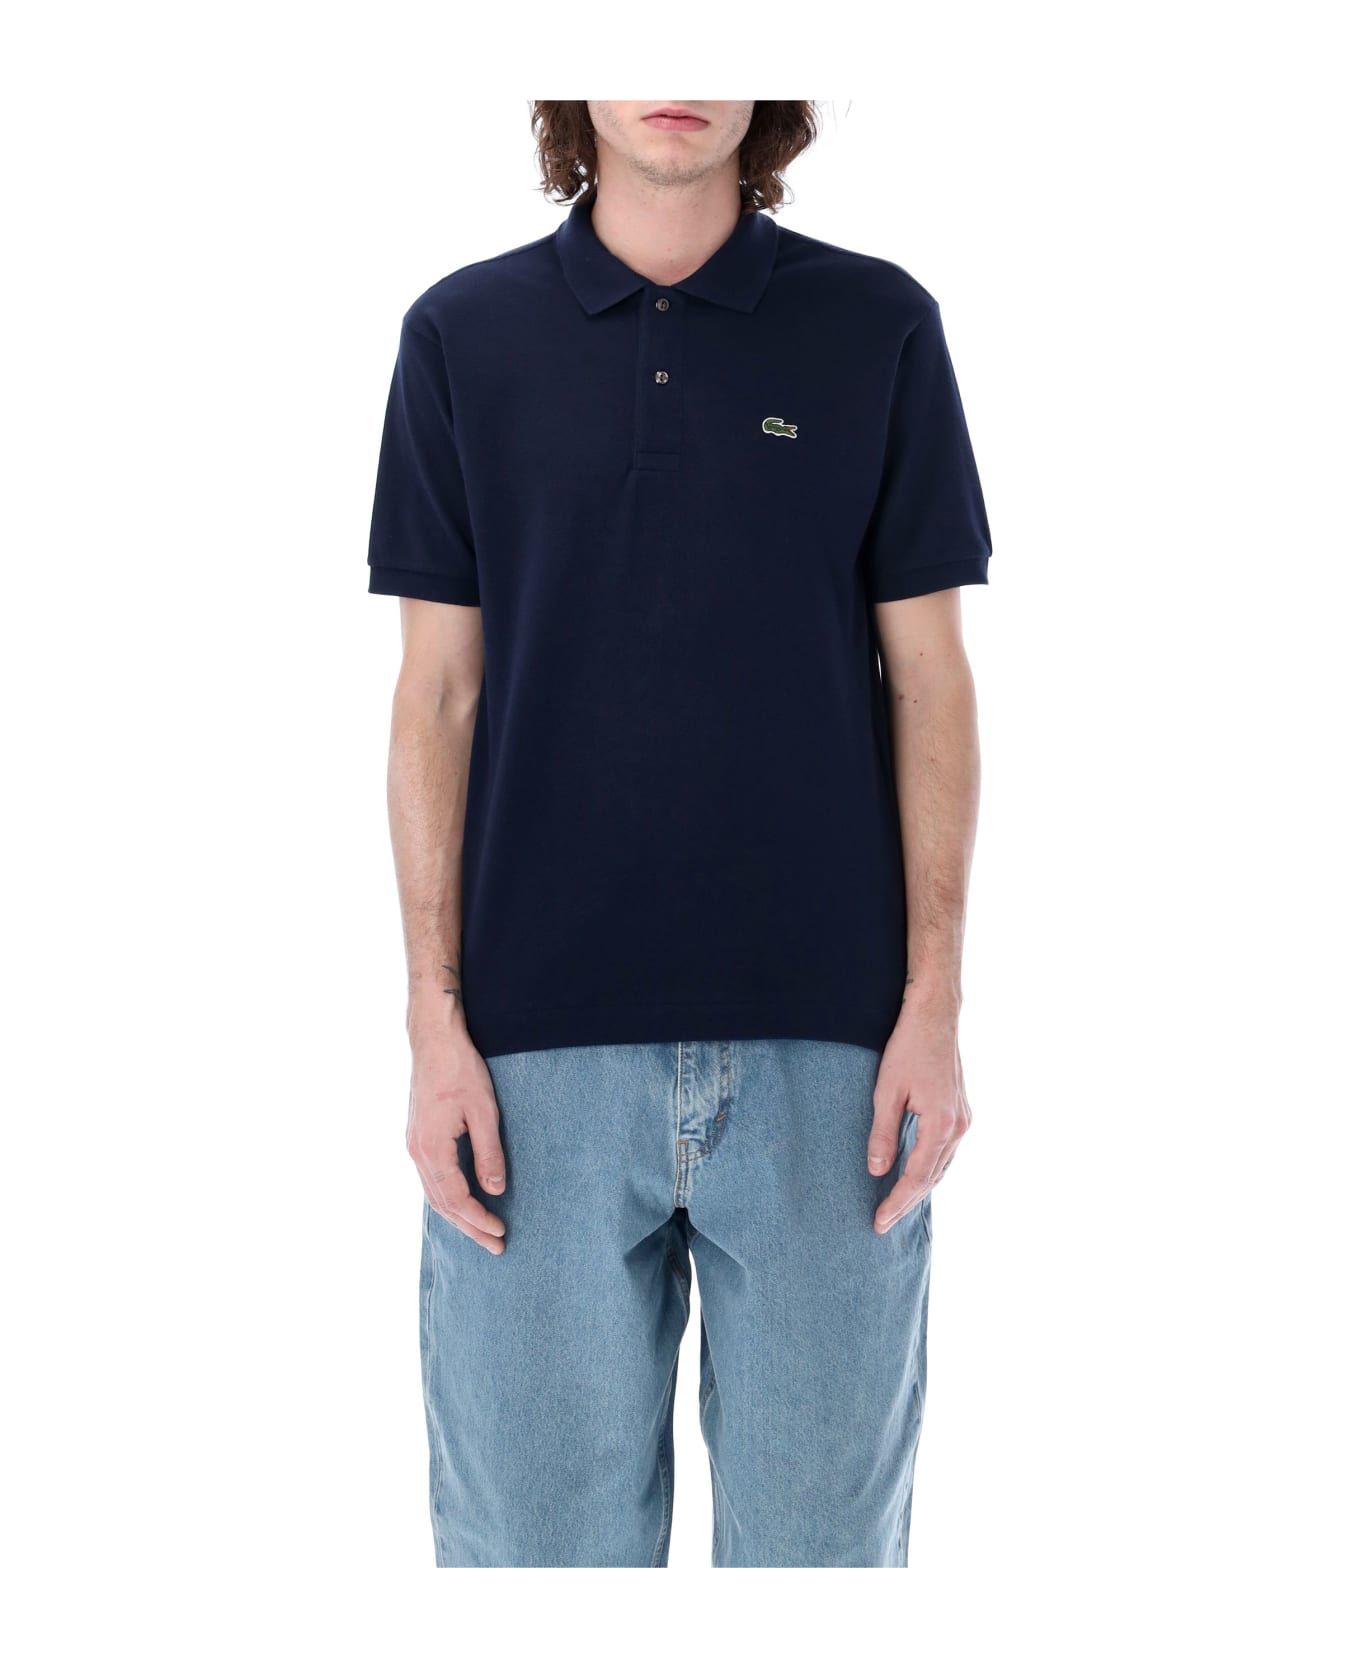 Lacoste Classic Fit Polo Shirt - MARINE